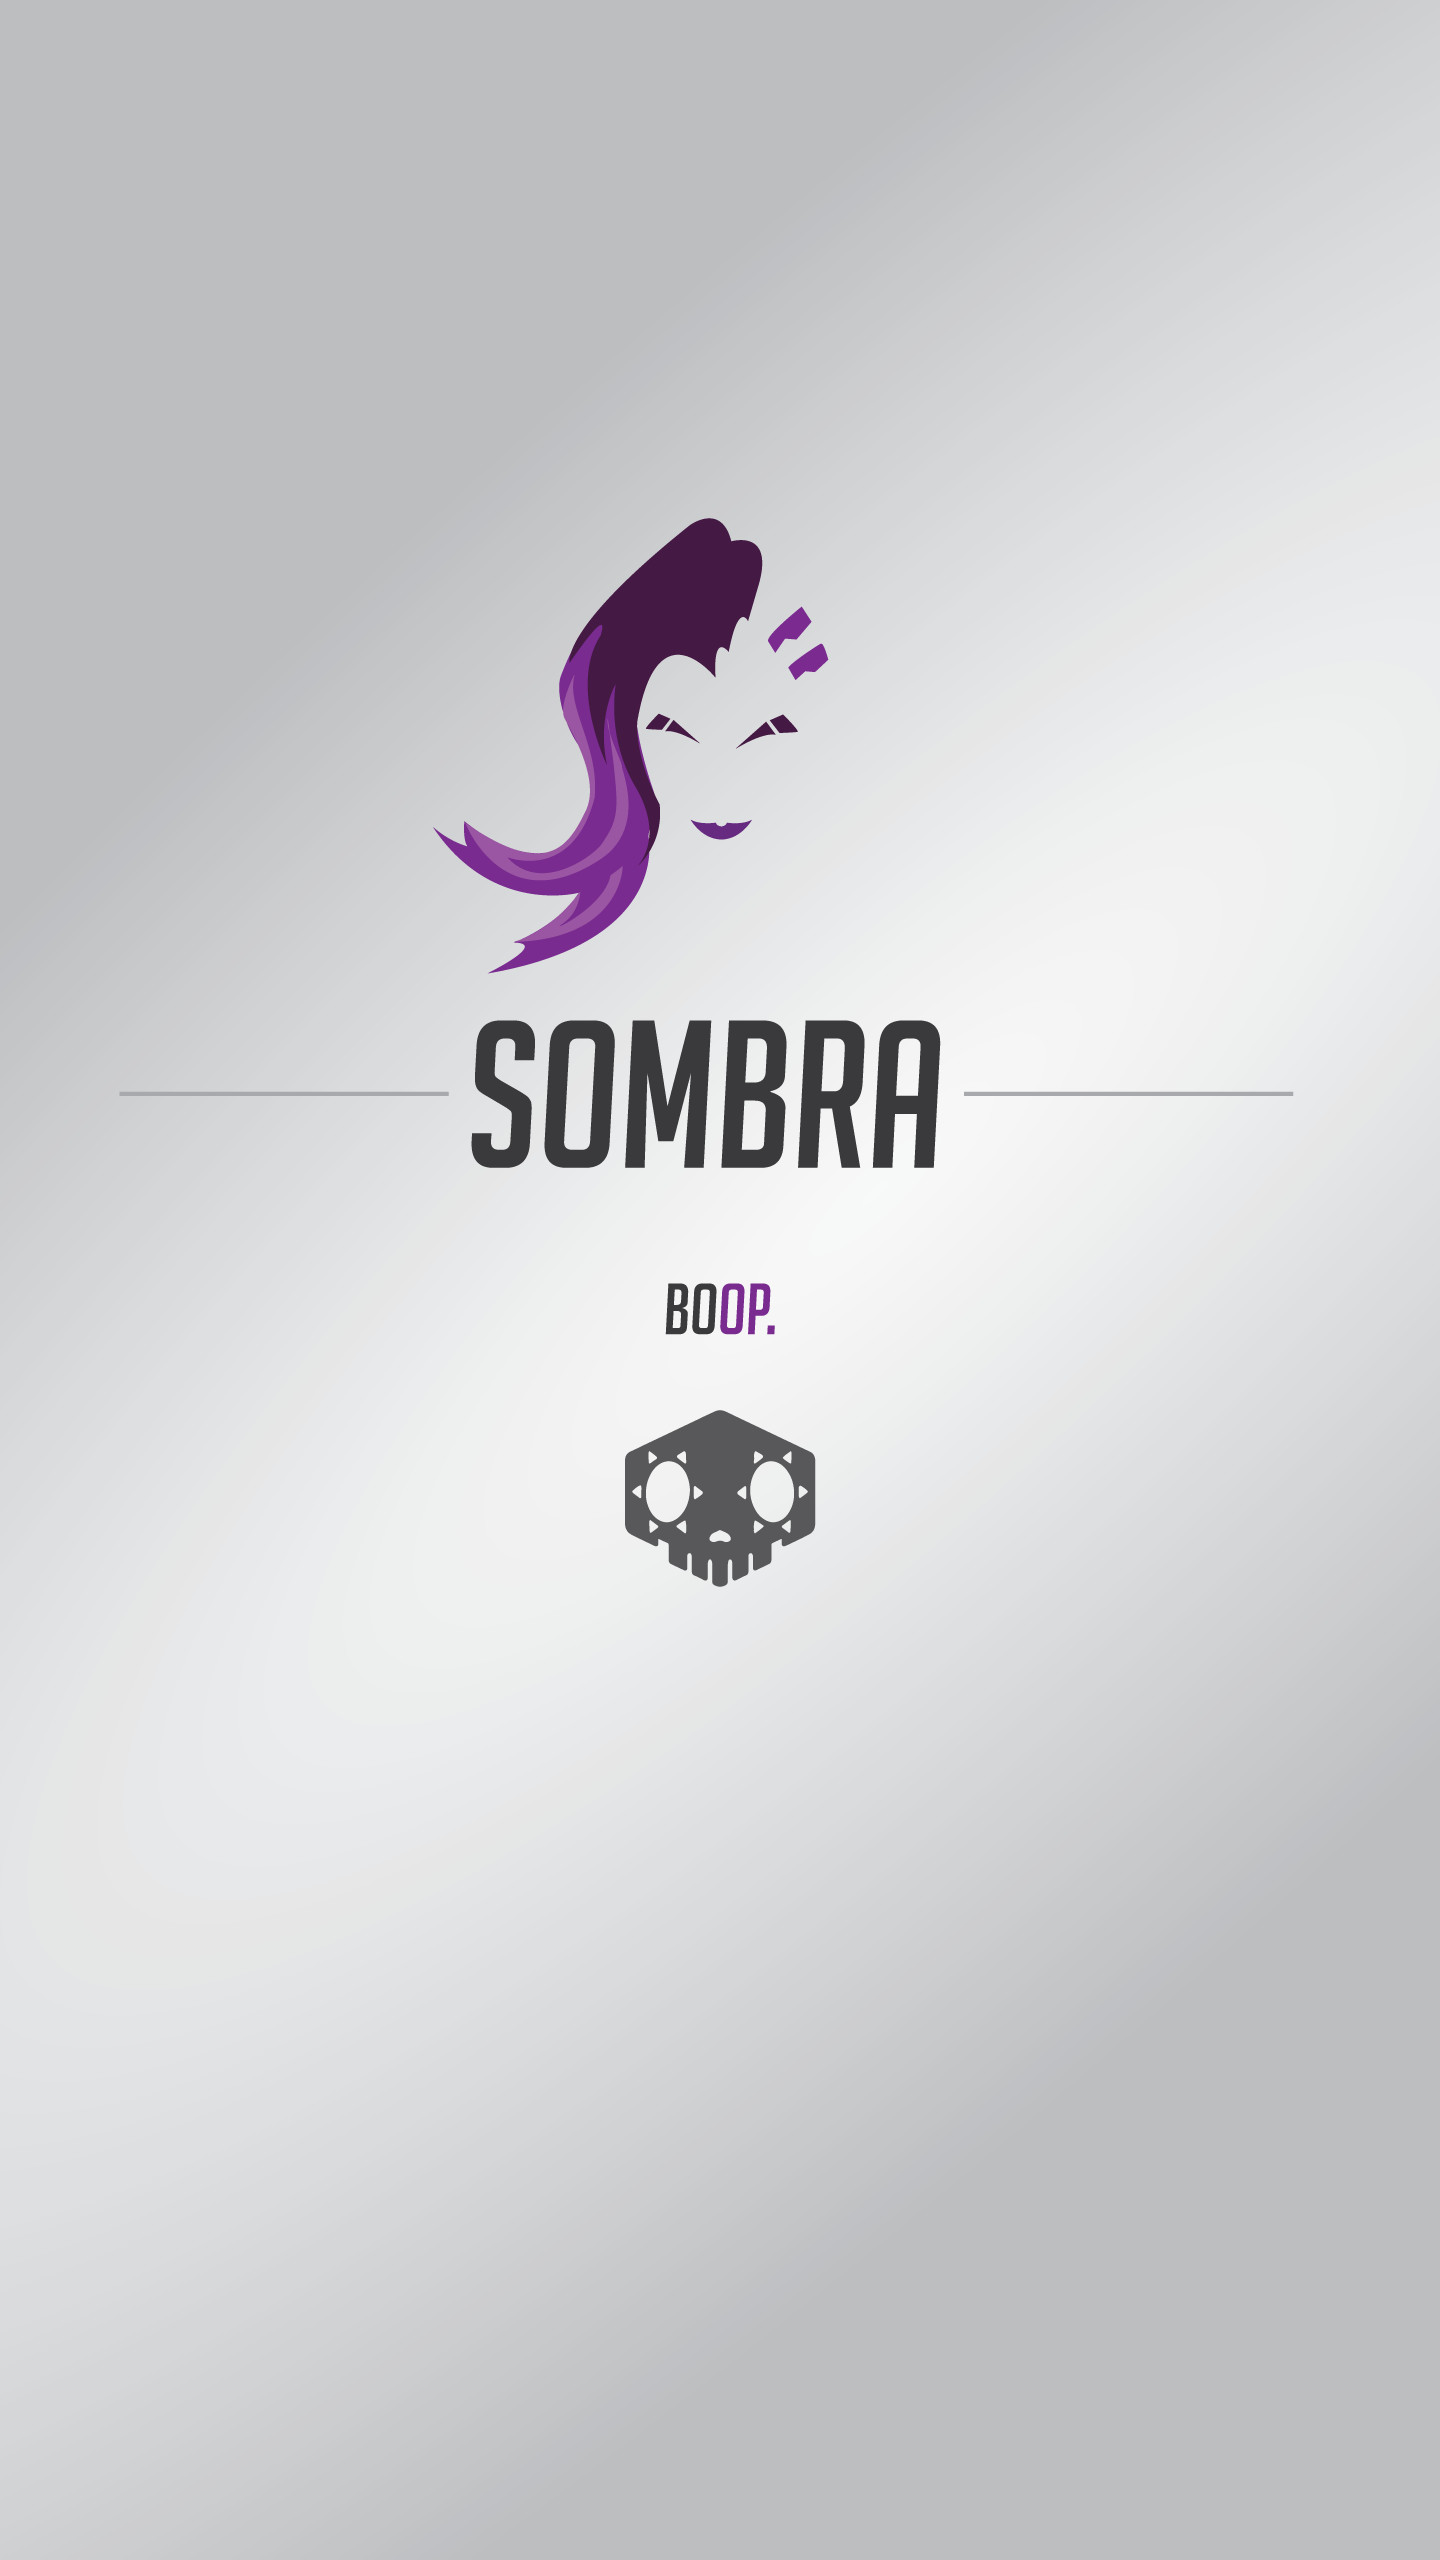 1440x2560 Sombra "Boop." Light V2 Android